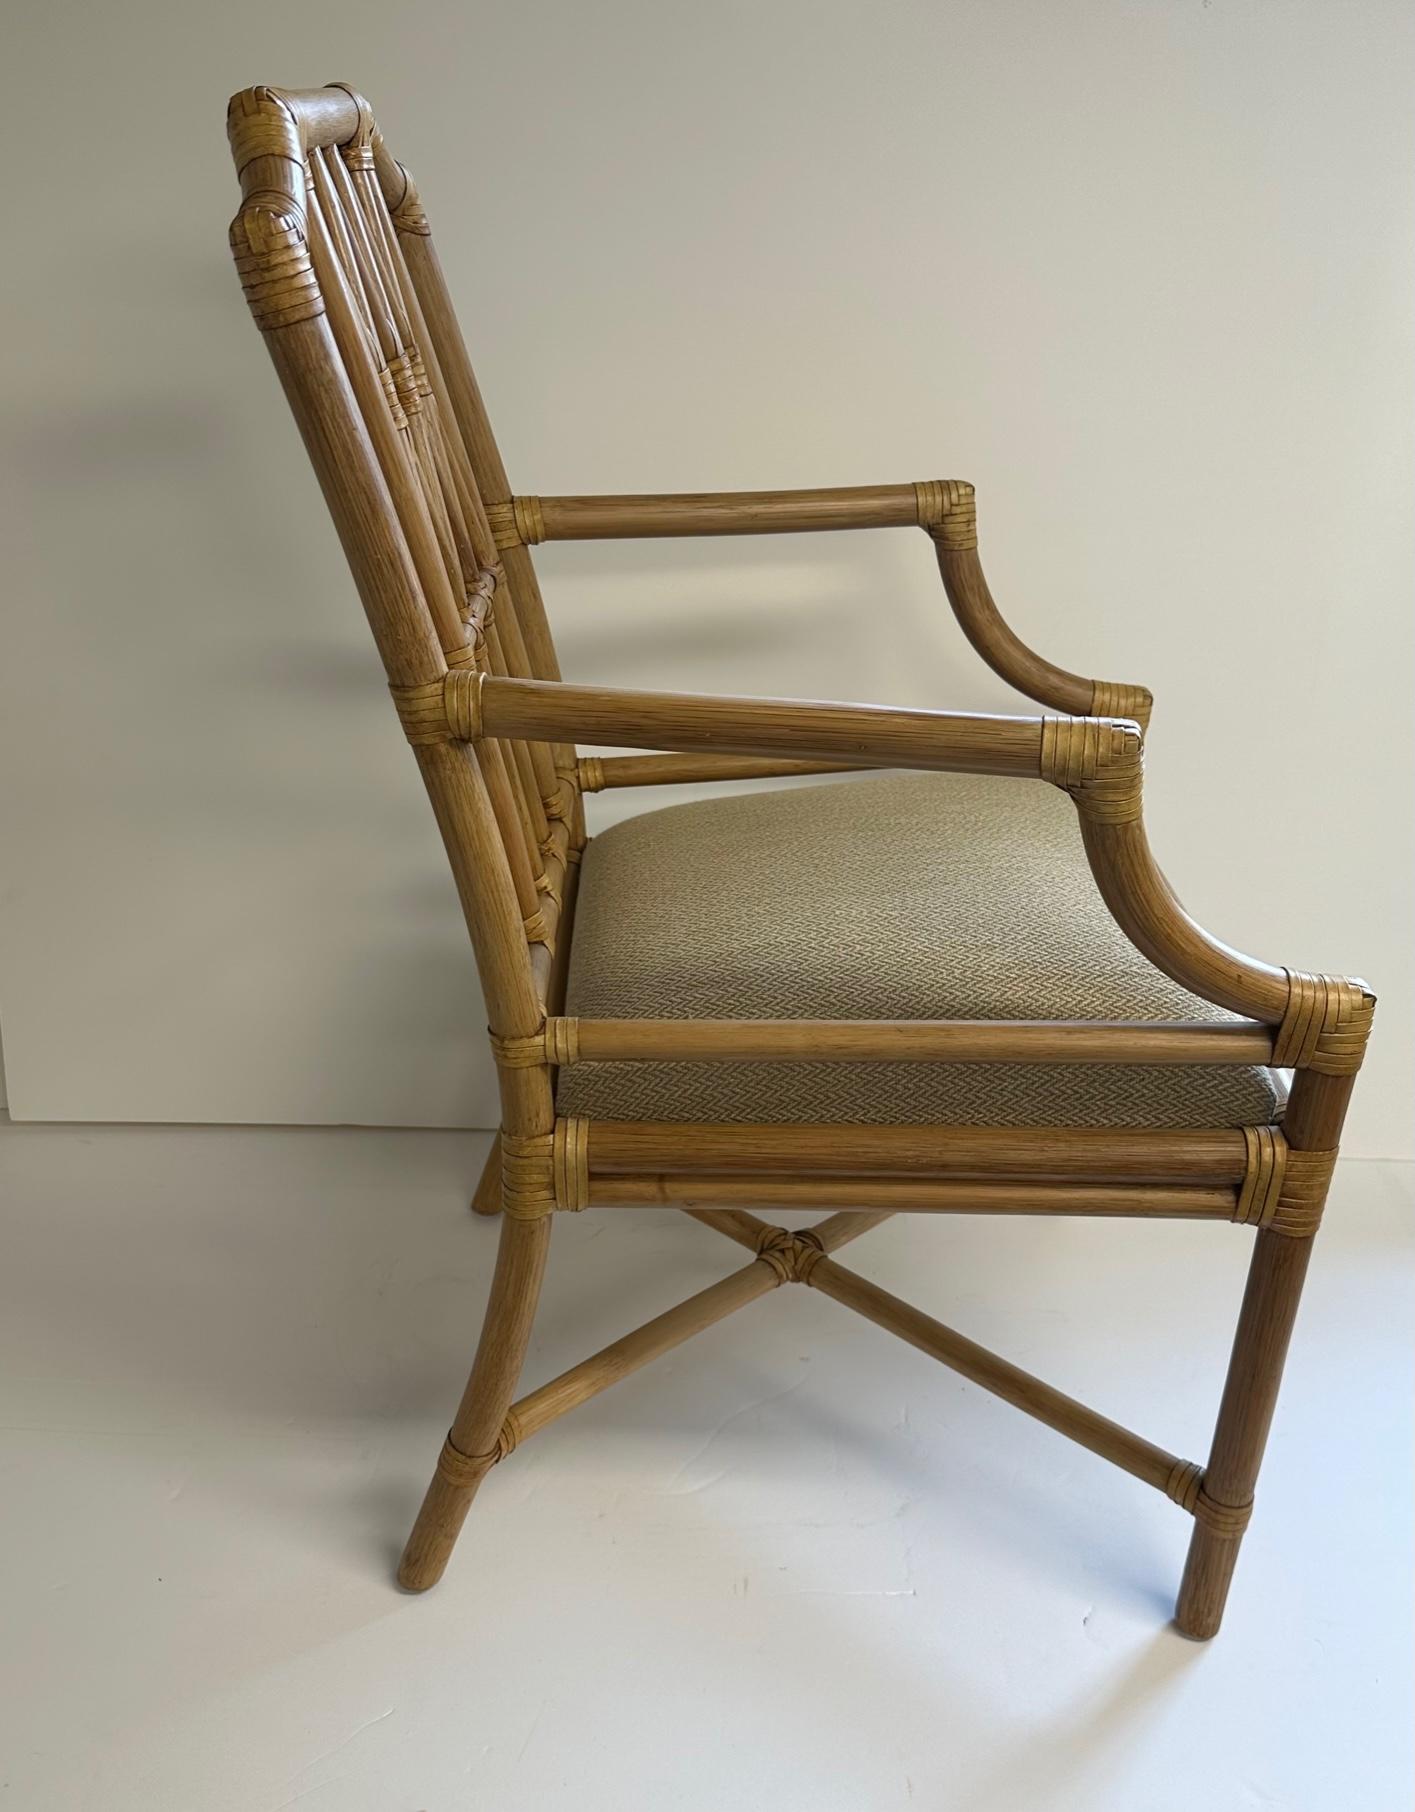 Never goes out of style McGuire bamboo armchair having neutral upholstered seat.  Arm height 26